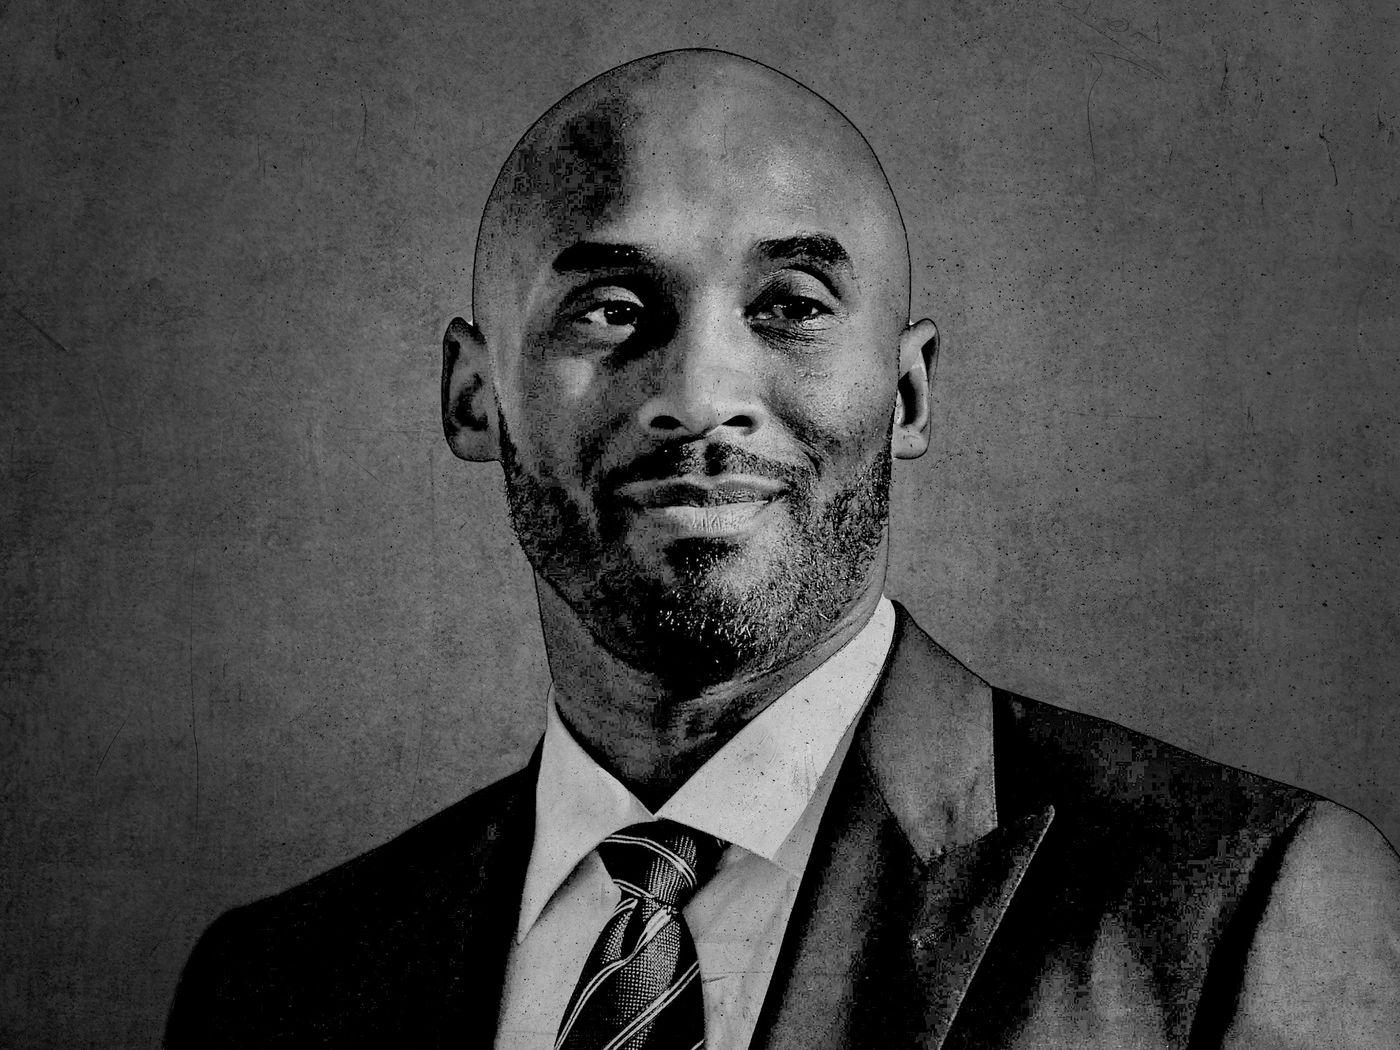 Kobe Bryant Has Died in a Helicopter Crash